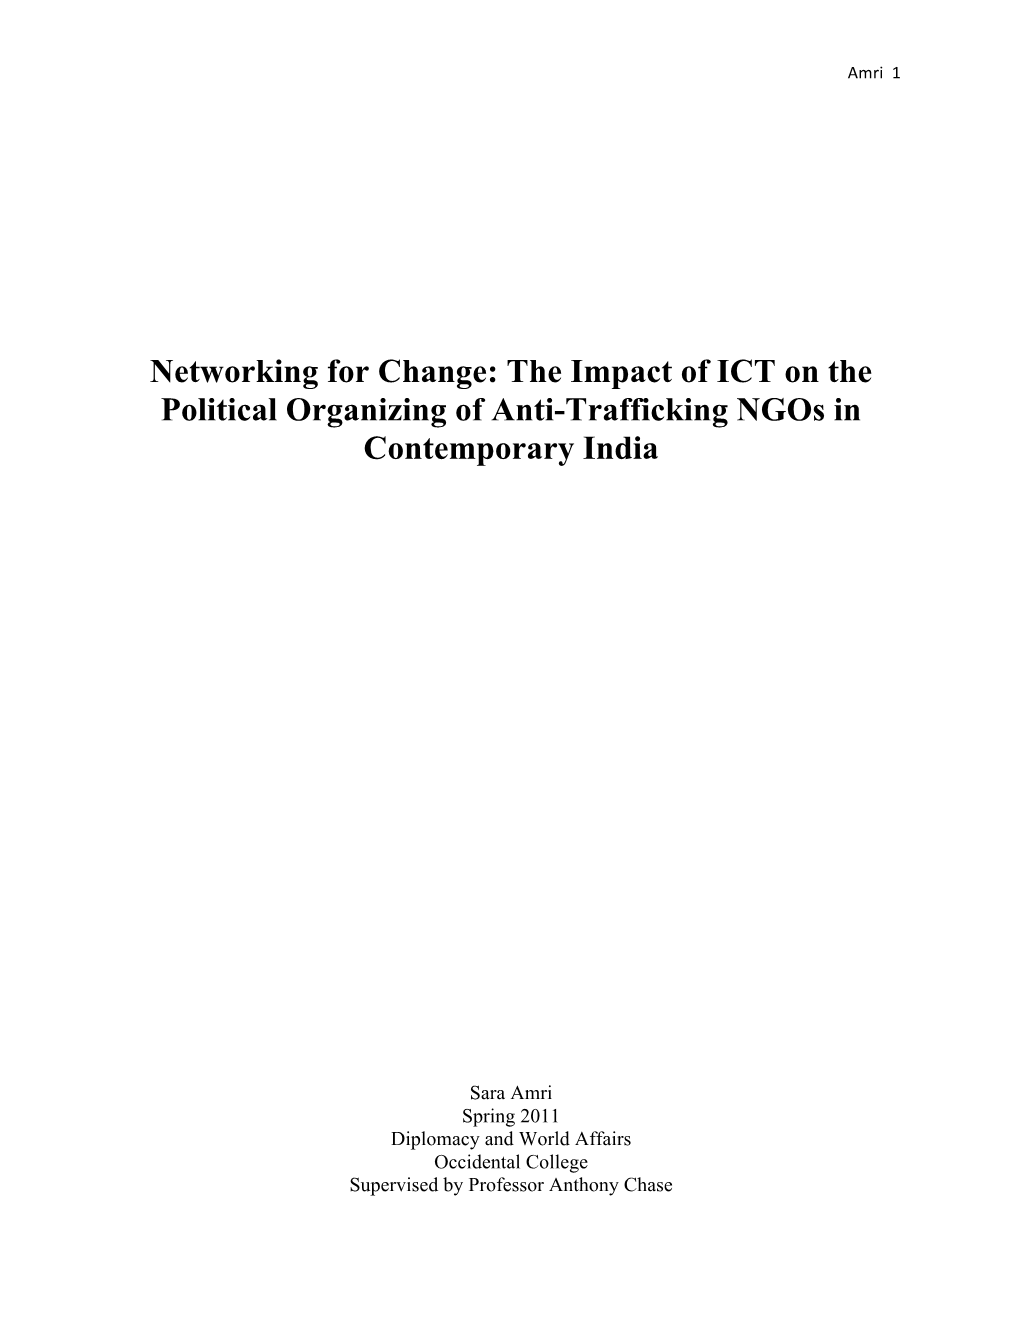 The Impact of ICT on the Political Organizing of Anti-Trafficking Ngos in Contemporary India